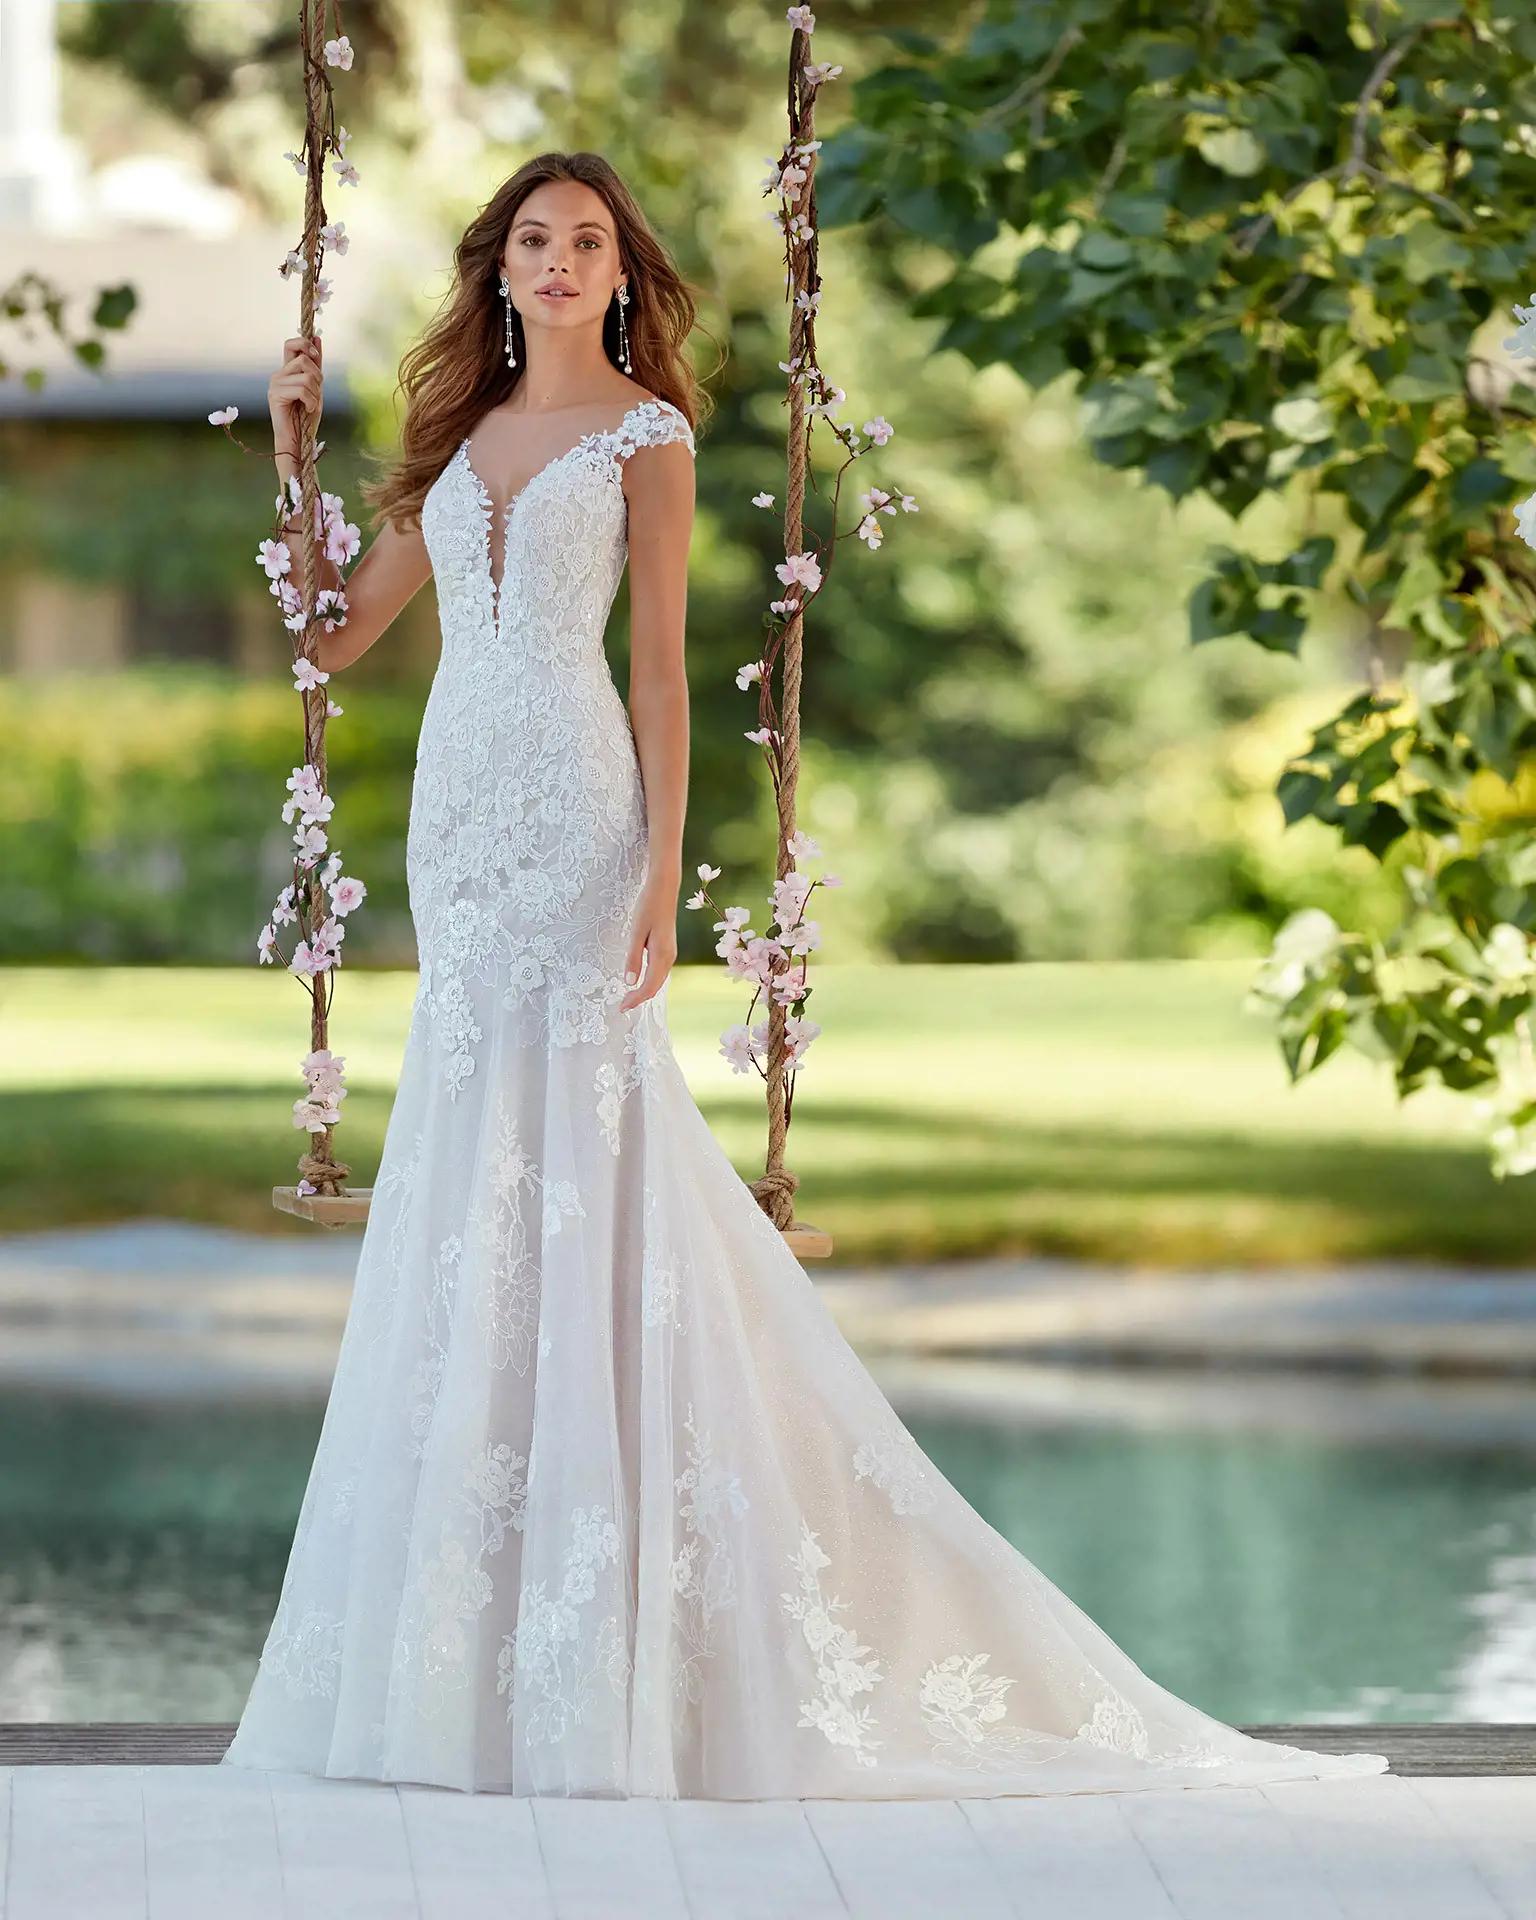 Setting a Budget for Your Dream Dress Image